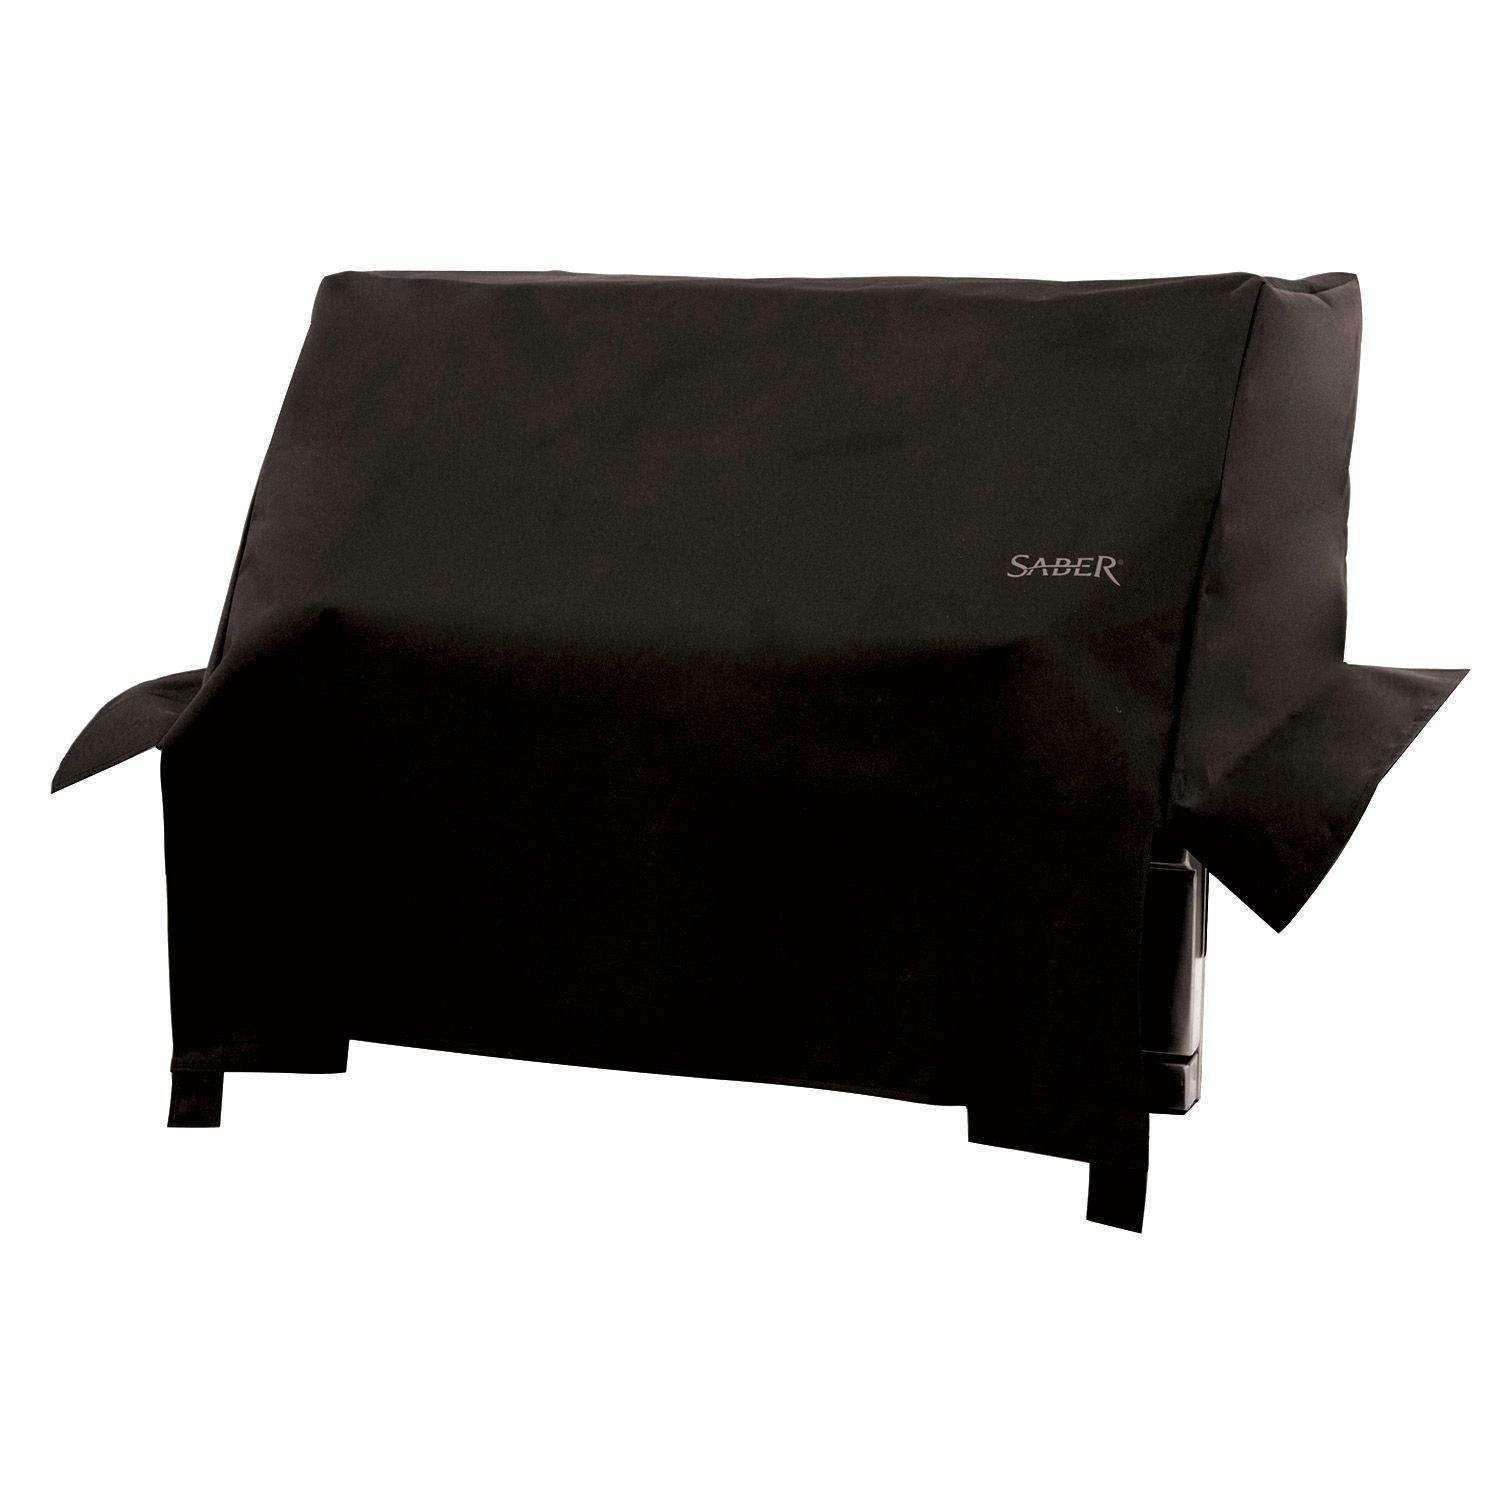 Saber Grill Cover for Saber 500 Built-In Grill · 32 in.